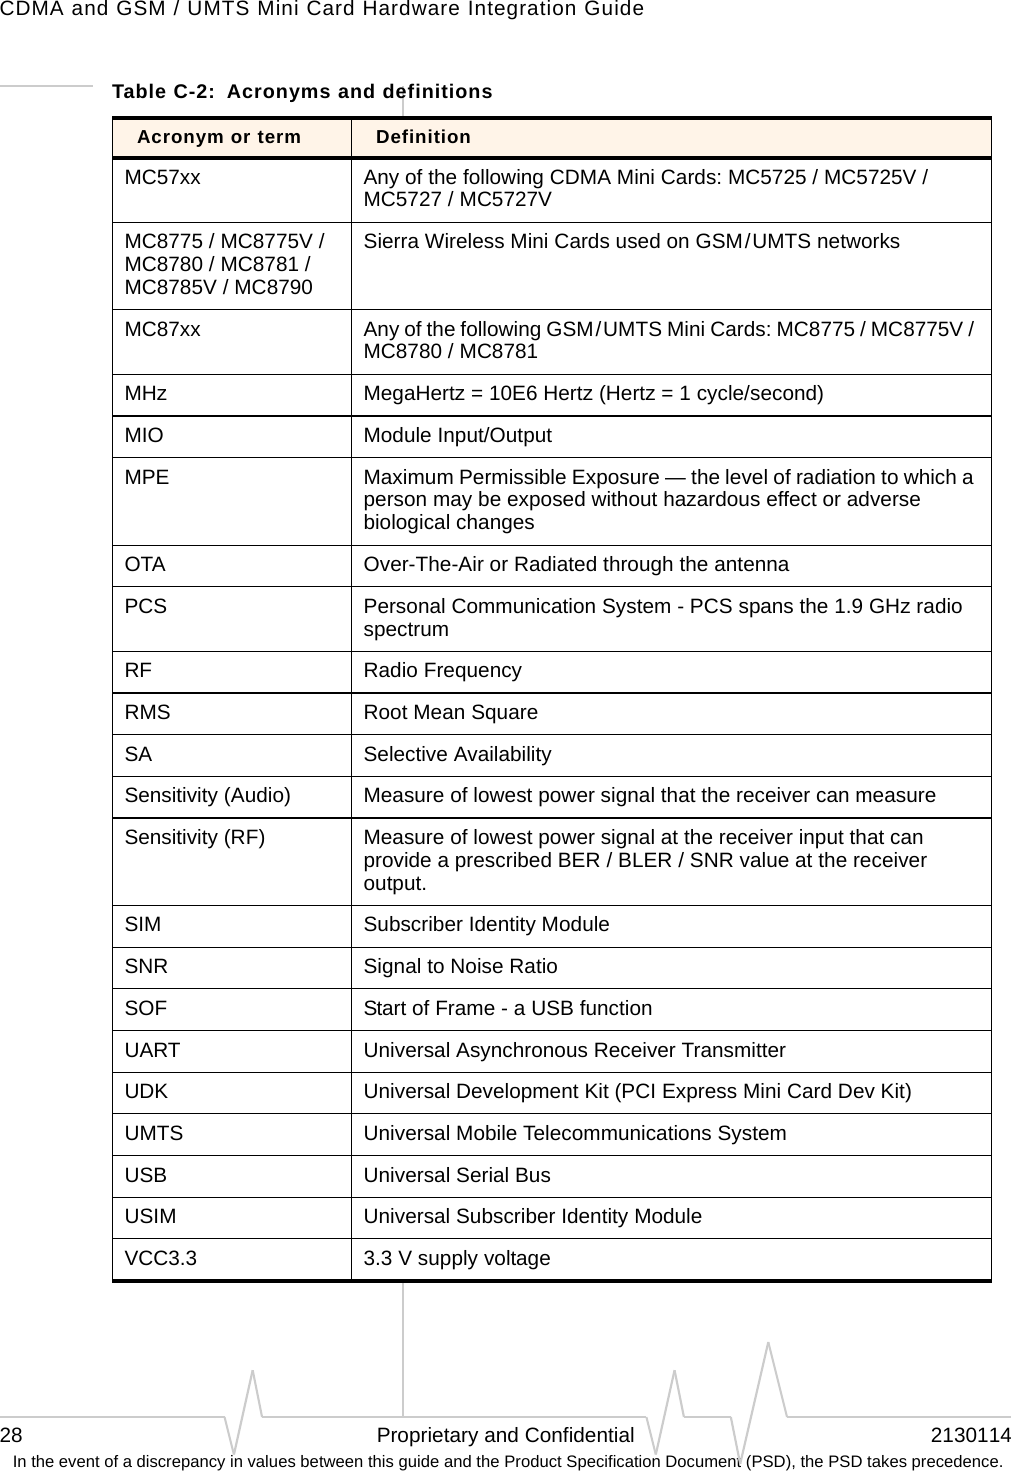 CDMA and GSM / UMTS Mini Card Hardware Integration Guide28 Proprietary and Confidential 2130114 In the event of a discrepancy in values between this guide and the Product Specification Document (PSD), the PSD takes precedence.MC57xx Any of the following CDMA Mini Cards: MC5725 / MC5725V / MC5727 / MC5727VMC8775 / MC8775V / MC8780 / MC8781 / MC8785V / MC8790Sierra Wireless Mini Cards used on GSM / UMTS networksMC87xx Any of the following GSM / UMTS Mini Cards: MC8775 / MC8775V / MC8780 / MC8781MHz MegaHertz = 10E6 Hertz (Hertz = 1 cycle/second)MIO Module Input/OutputMPE Maximum Permissible Exposure — the level of radiation to which a person may be exposed without hazardous effect or adverse biological changesOTA Over-The-Air or Radiated through the antennaPCS Personal Communication System - PCS spans the 1.9 GHz radio spectrumRF Radio FrequencyRMS Root Mean SquareSA Selective AvailabilitySensitivity (Audio) Measure of lowest power signal that the receiver can measureSensitivity (RF) Measure of lowest power signal at the receiver input that can provide a prescribed BER / BLER / SNR value at the receiver output.SIM Subscriber Identity ModuleSNR Signal to Noise RatioSOF Start of Frame - a USB functionUART Universal Asynchronous Receiver TransmitterUDK Universal Development Kit (PCI Express Mini Card Dev Kit)UMTS Universal Mobile Telecommunications SystemUSB Universal Serial BusUSIM Universal Subscriber Identity ModuleVCC3.3 3.3 V supply voltageTable C-2:  Acronyms and definitionsAcronym or term Definition